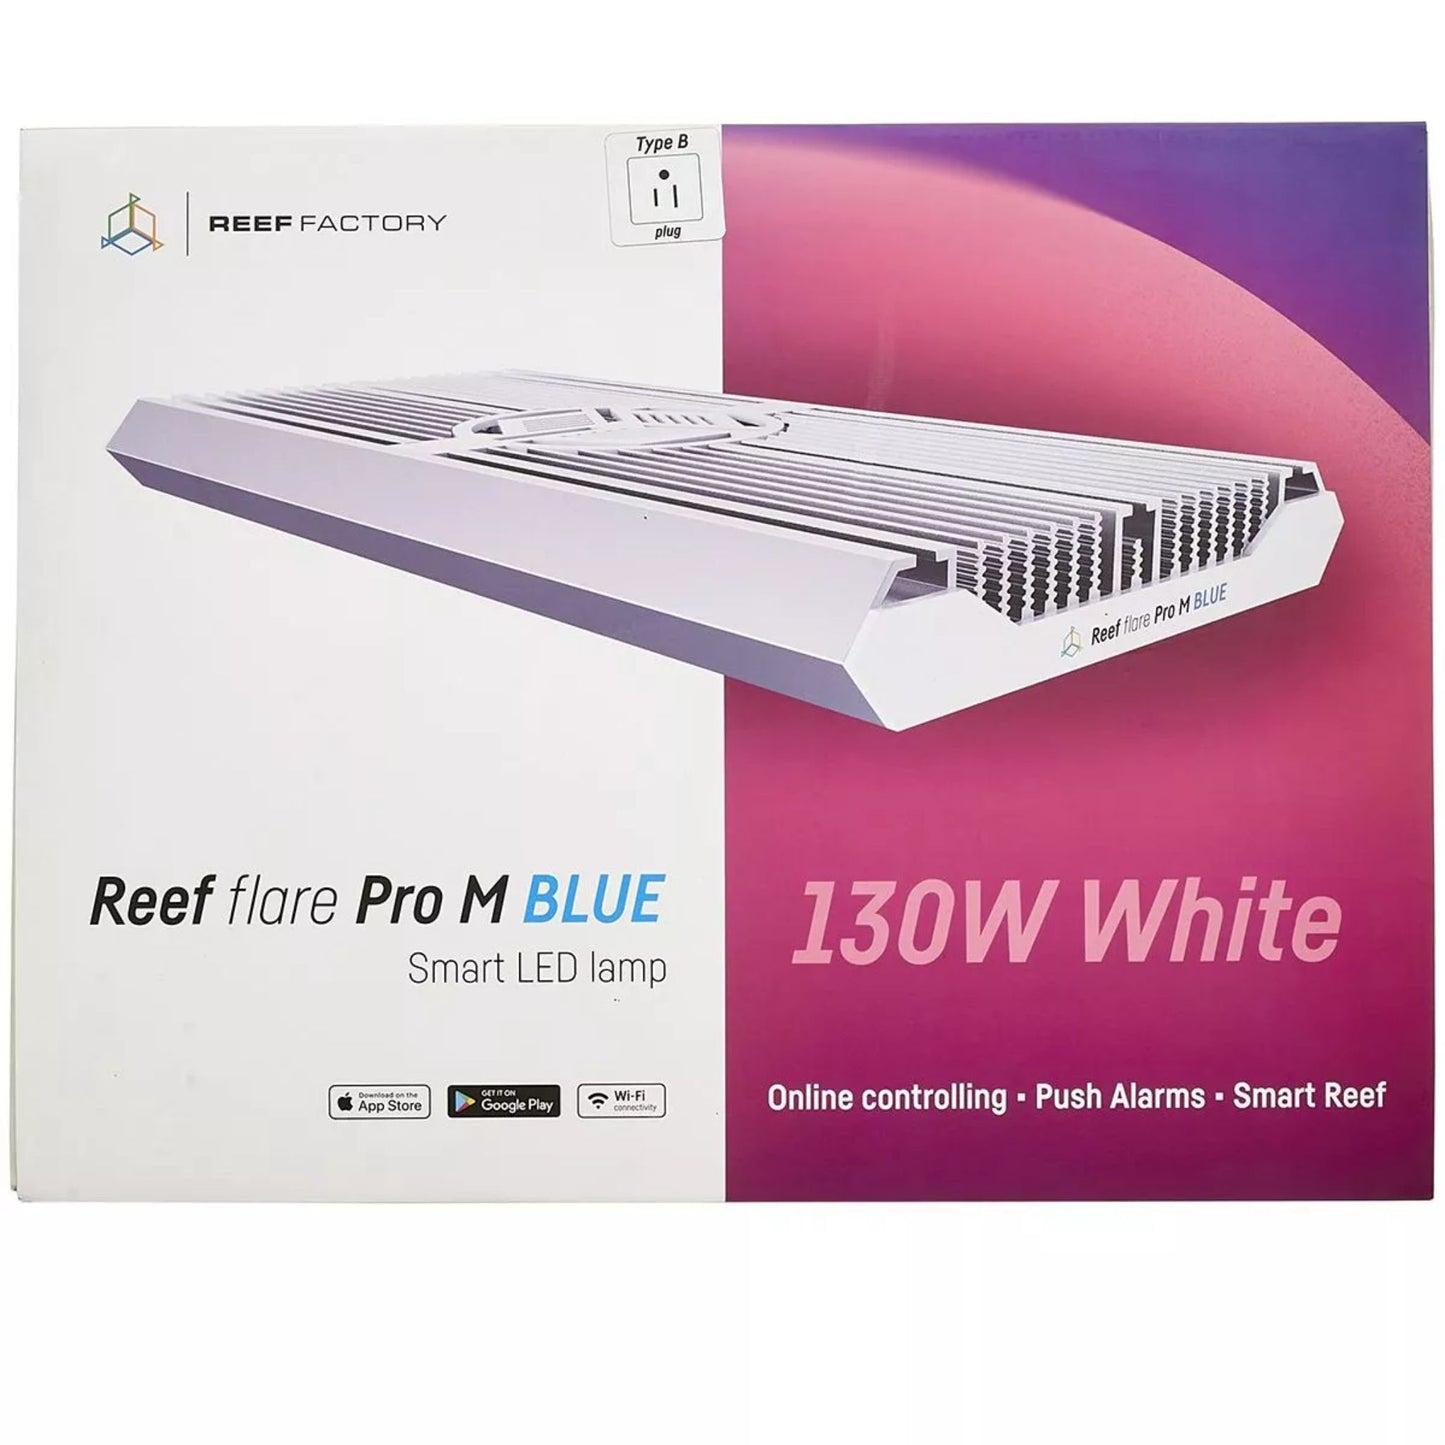 Reef Flare Pro Blue M LED Light - Reef Factory